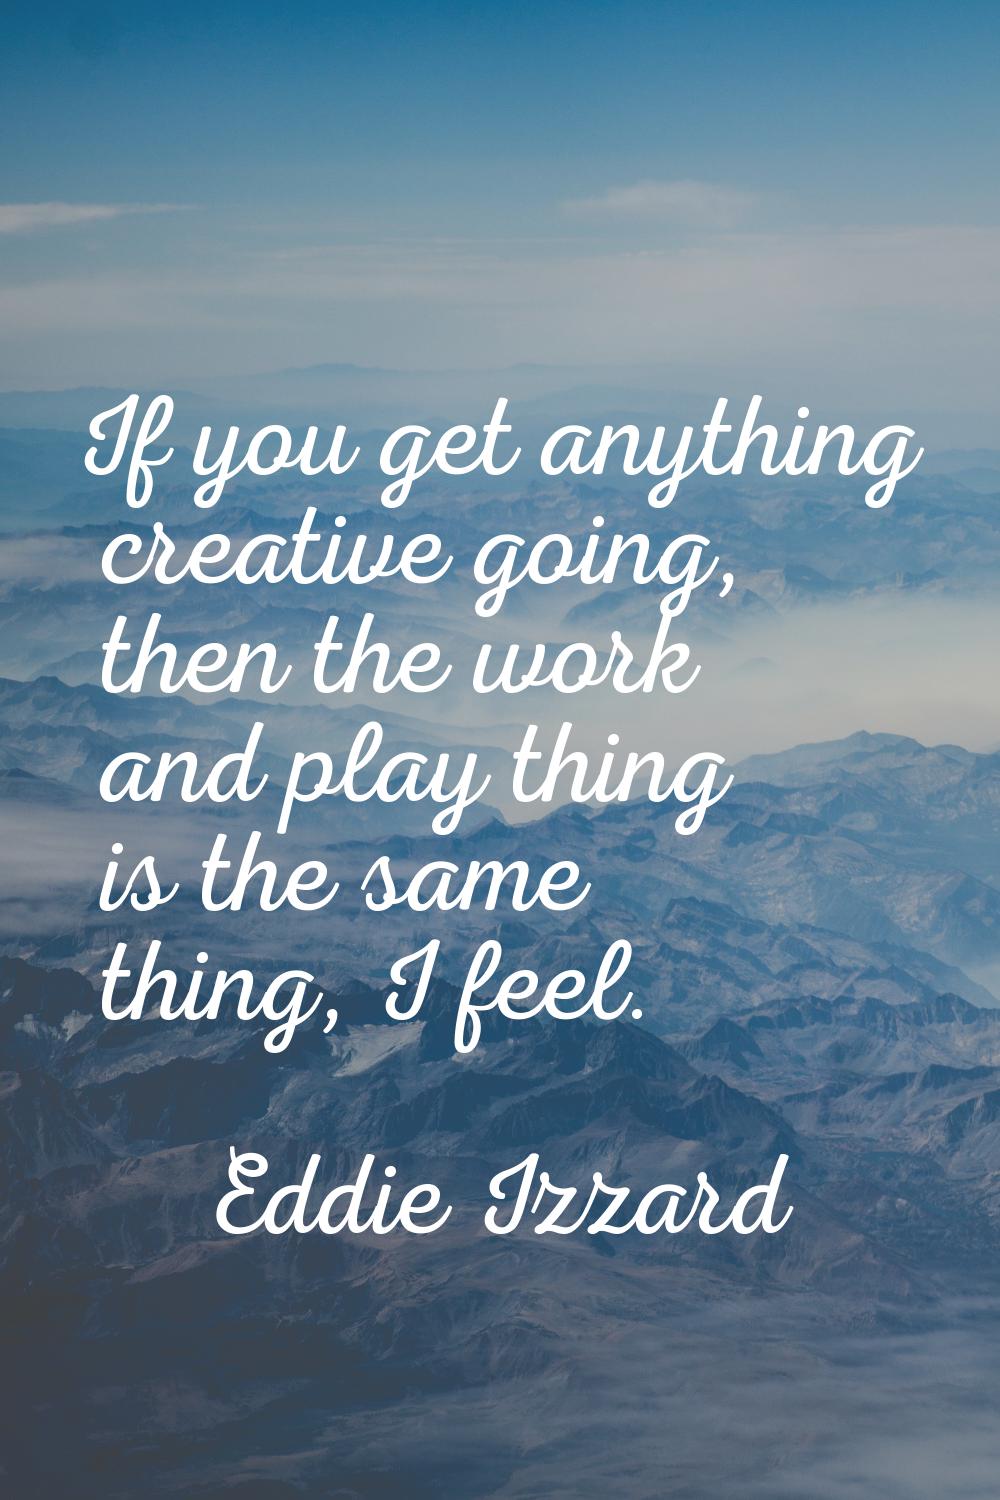 If you get anything creative going, then the work and play thing is the same thing, I feel.